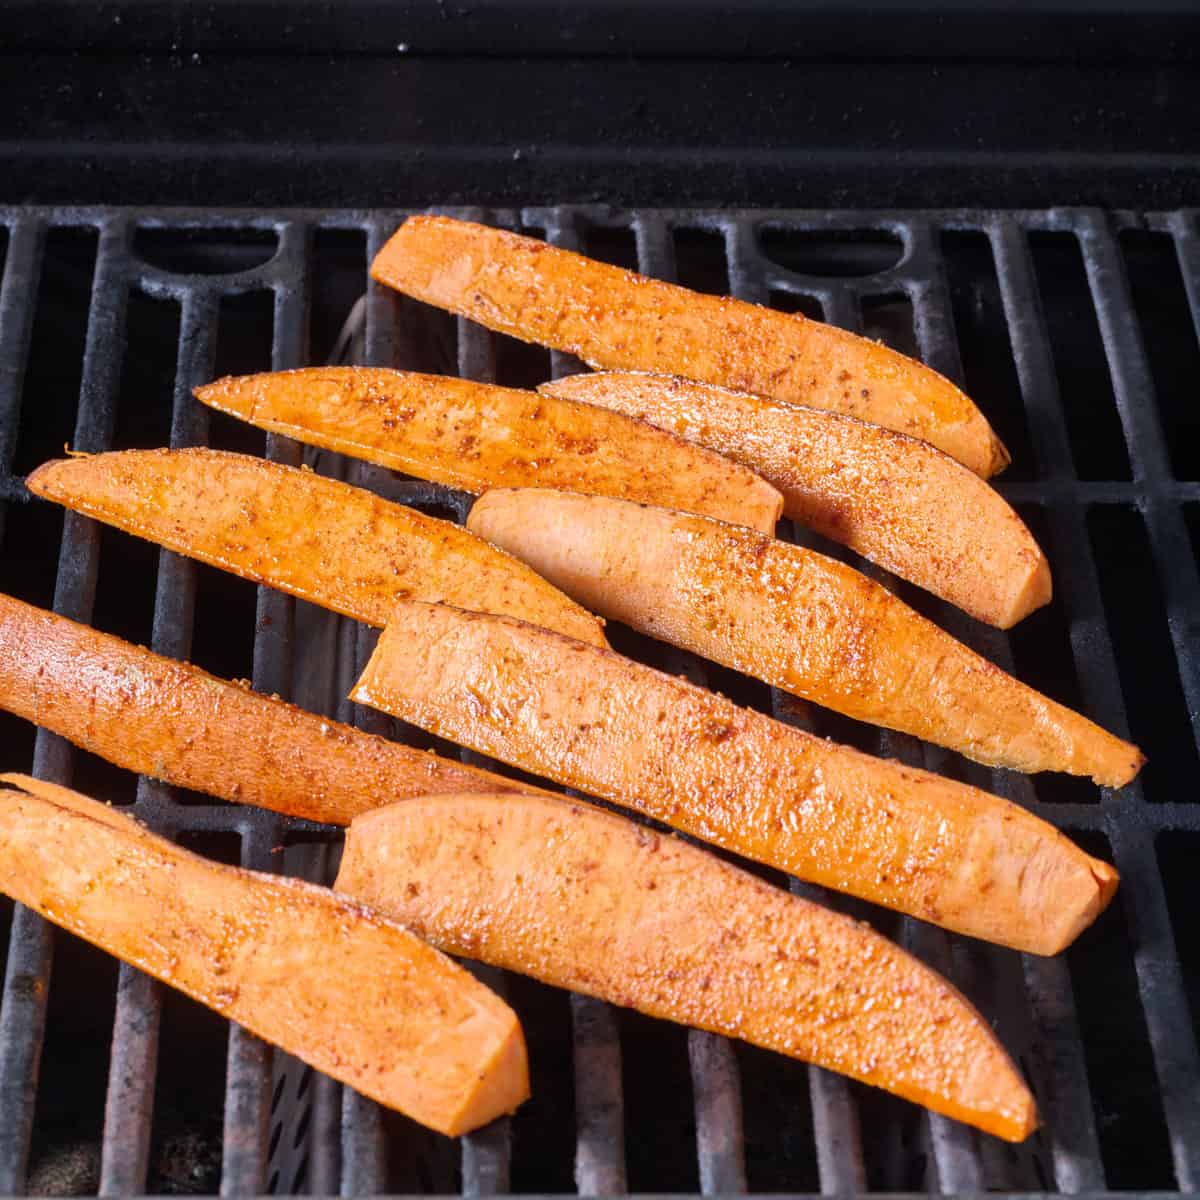 Sweet potato wedges on a grill.